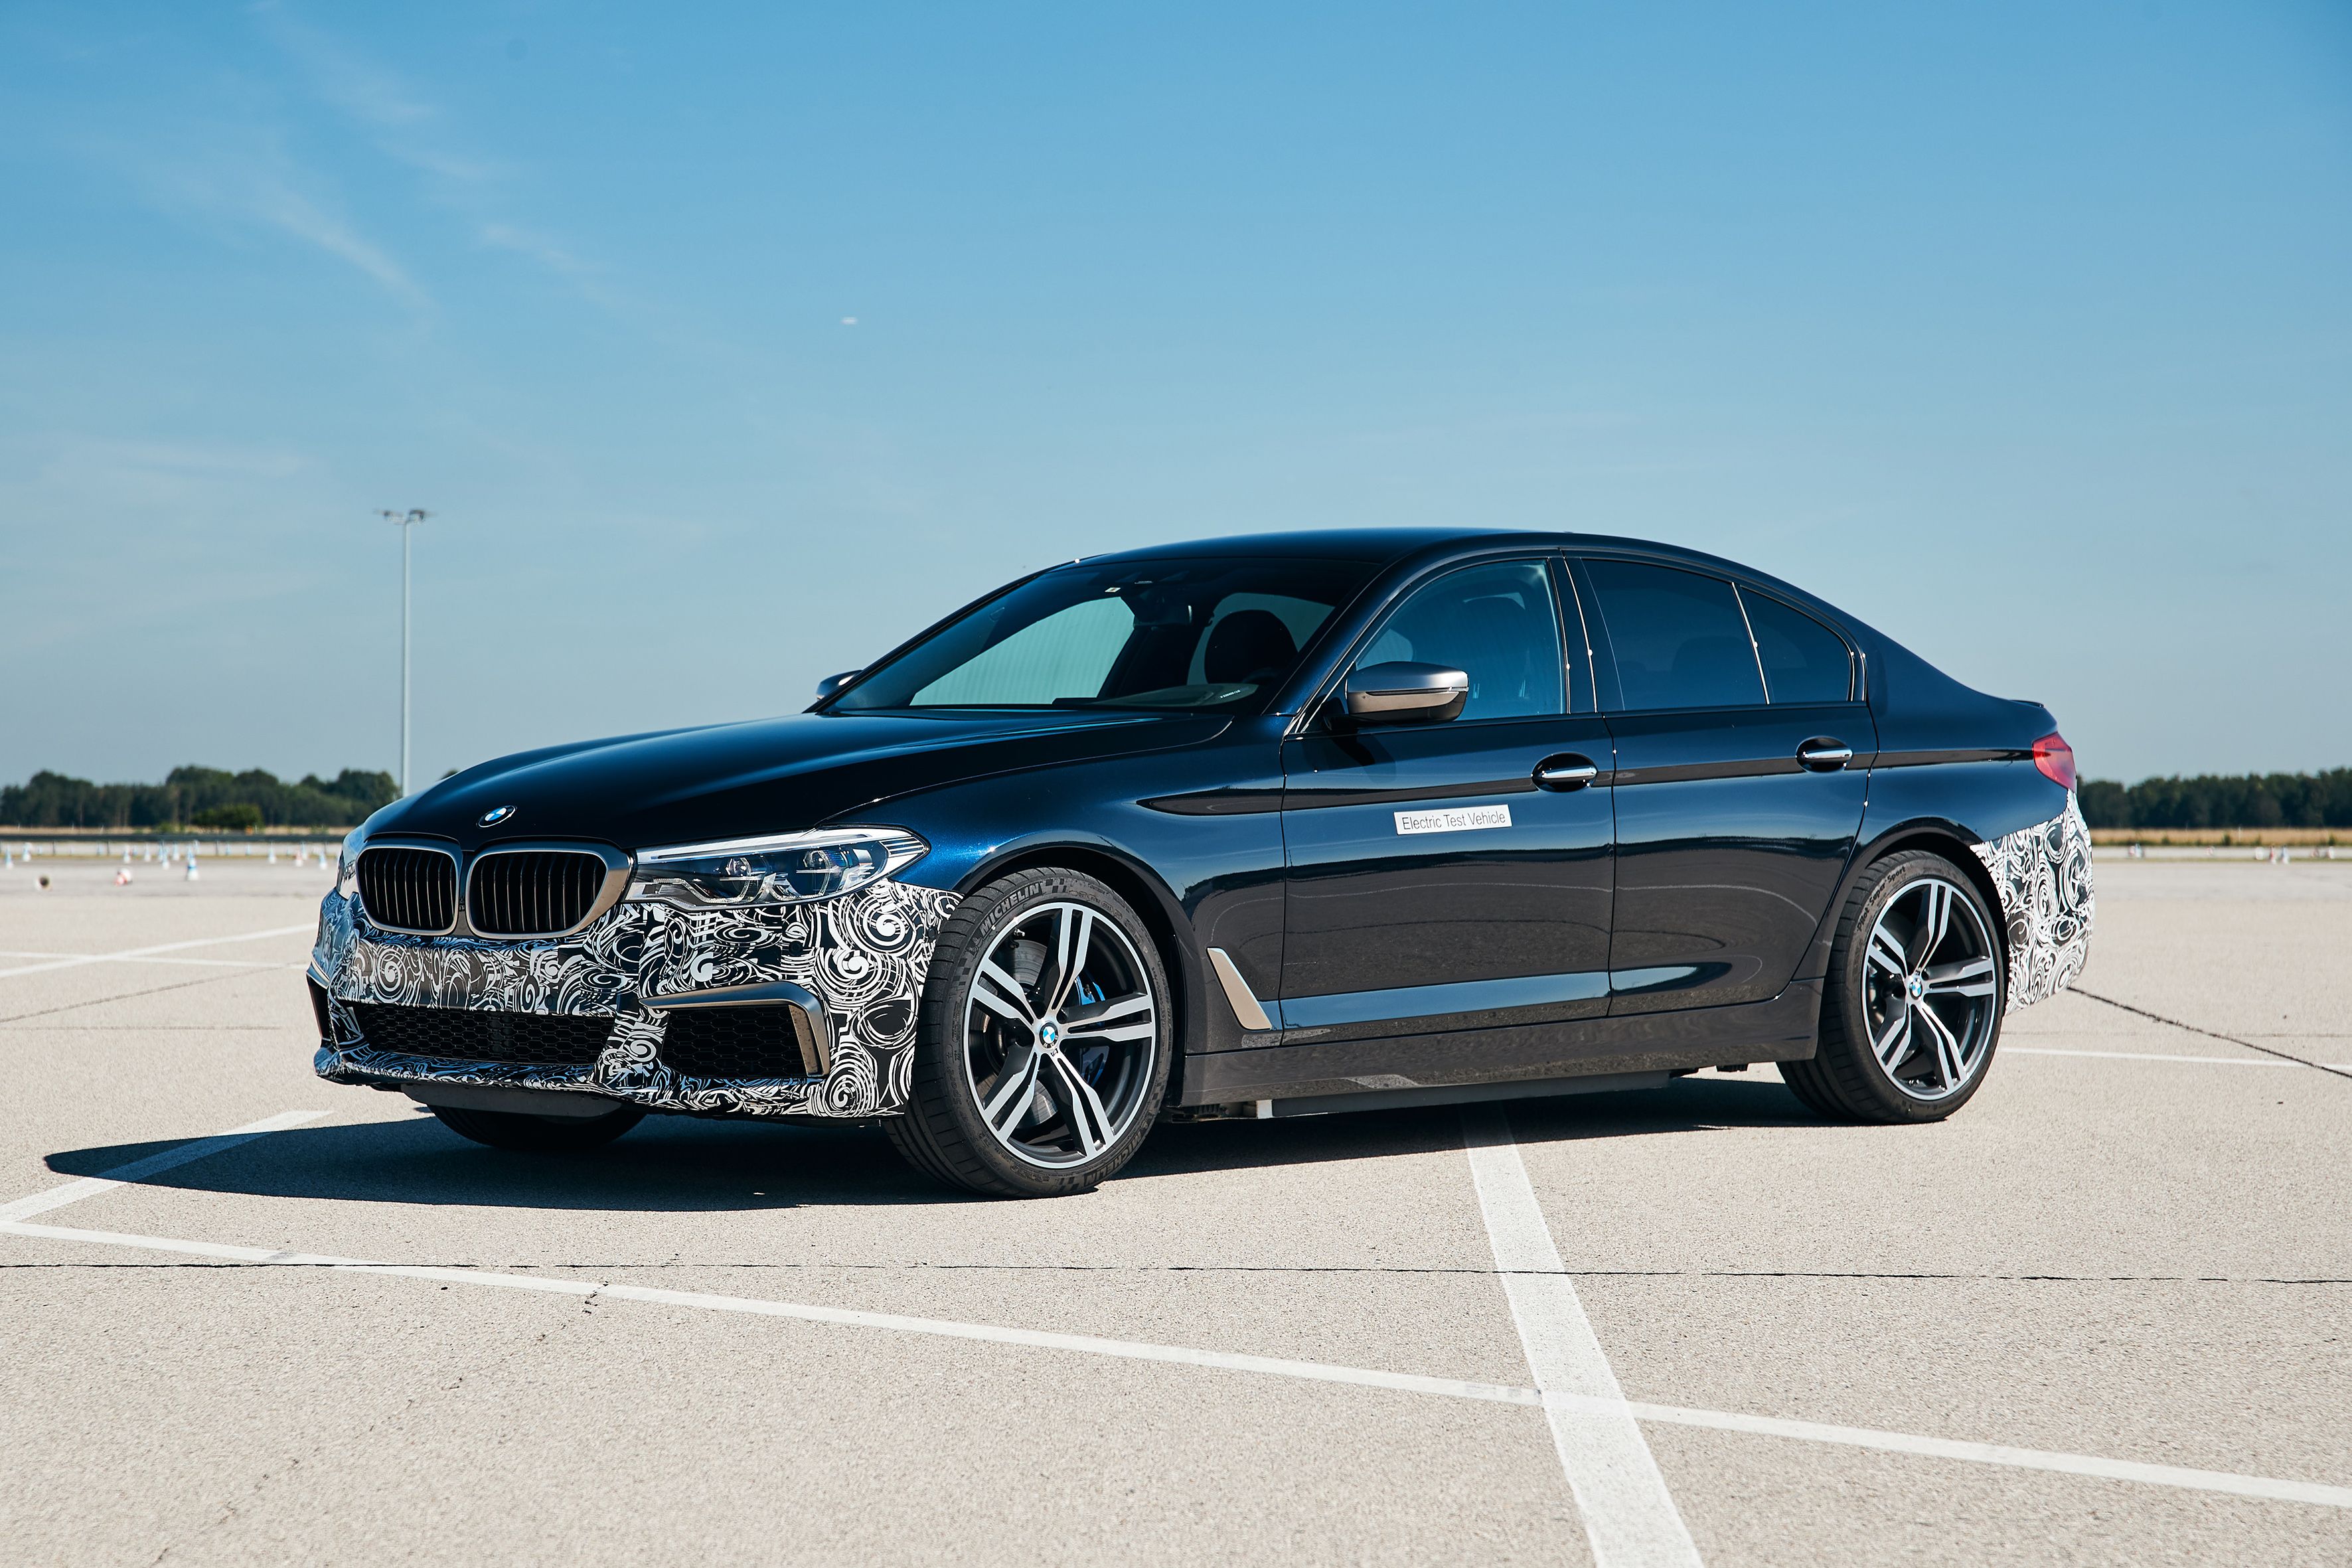 This is the new BMW 5 Series, and it's gone fully electric for the